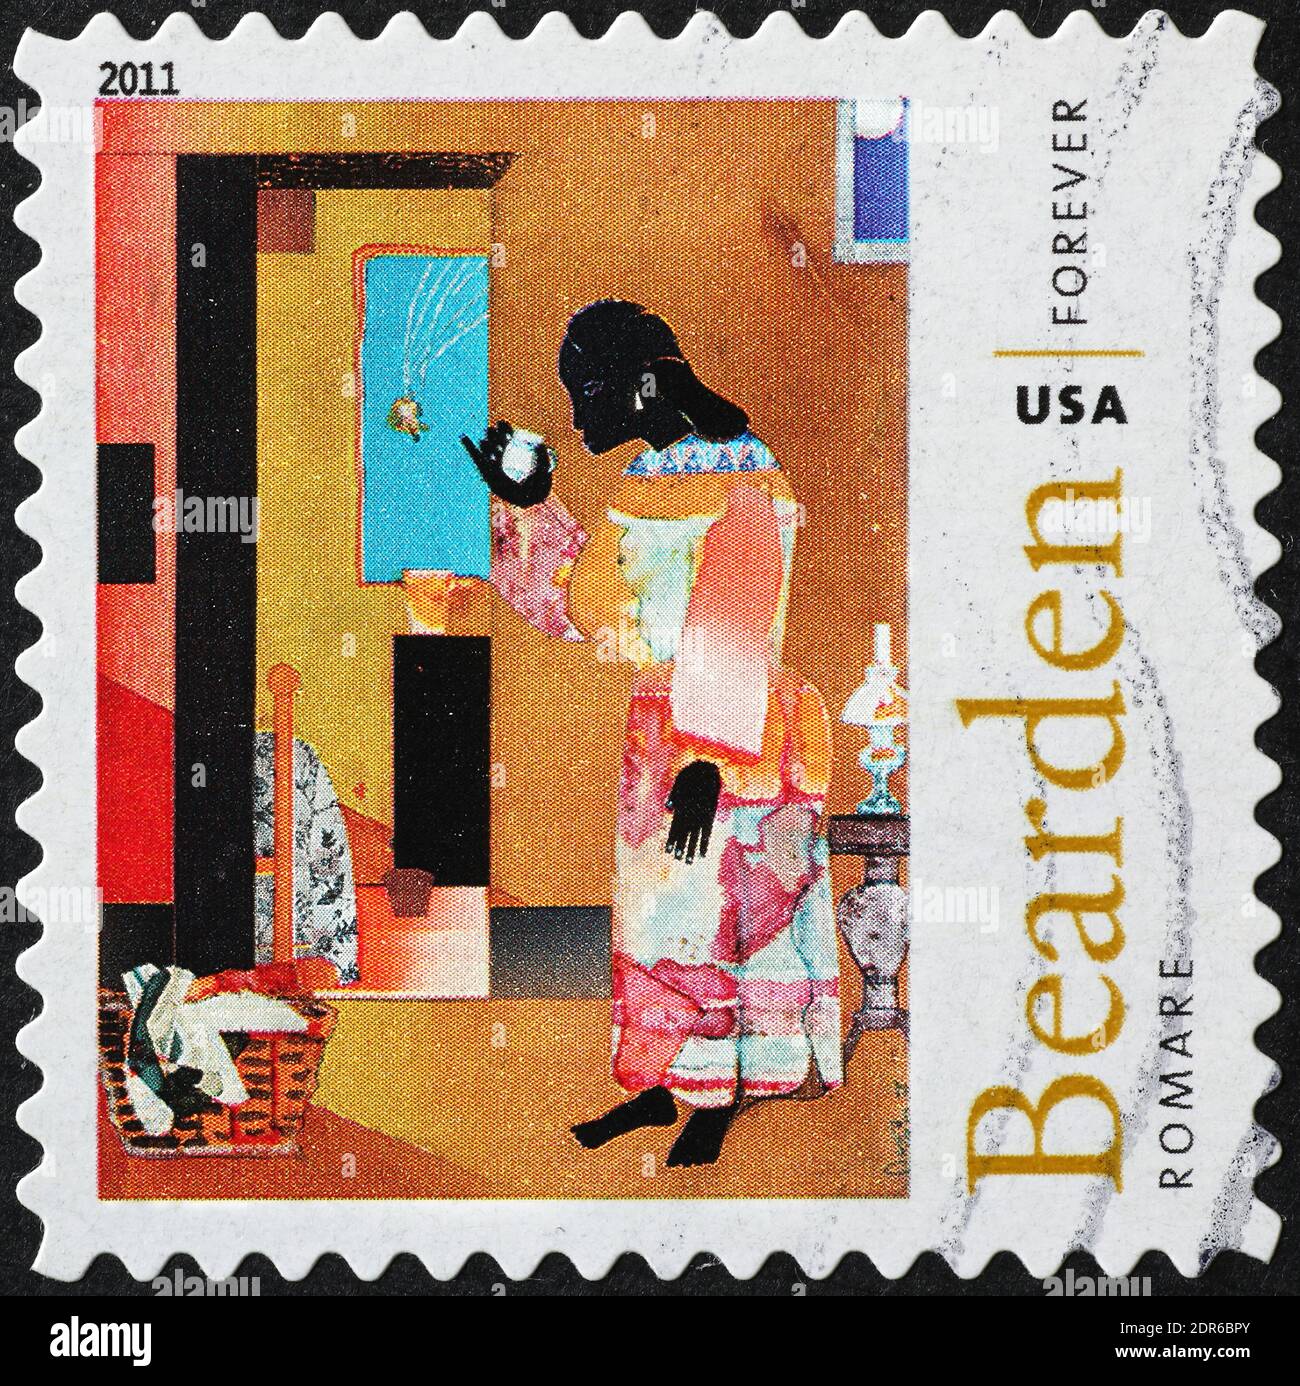 Painting by Romare Bearden on postage stamp Stock Photo